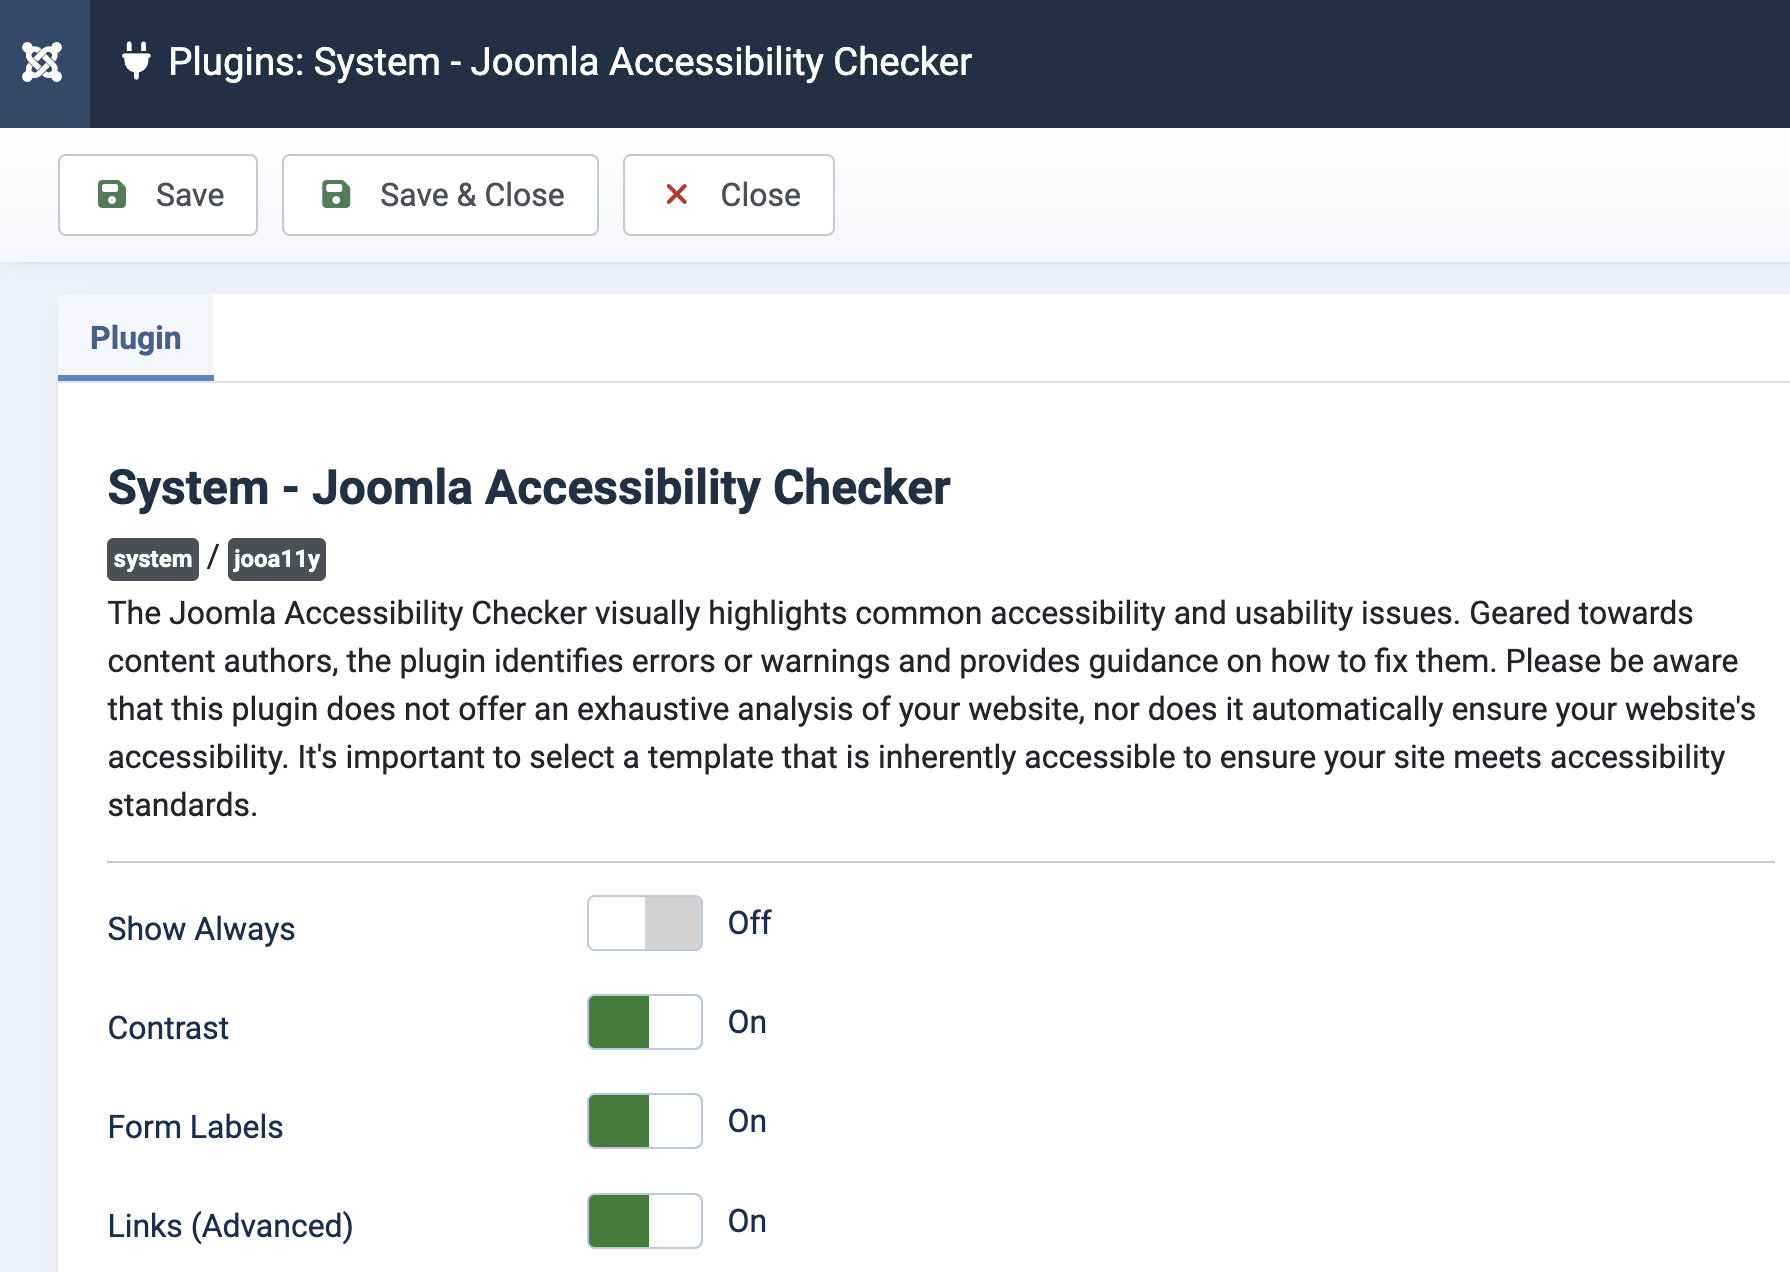 Screenshot of the settings page within the Joomla Administrator area.